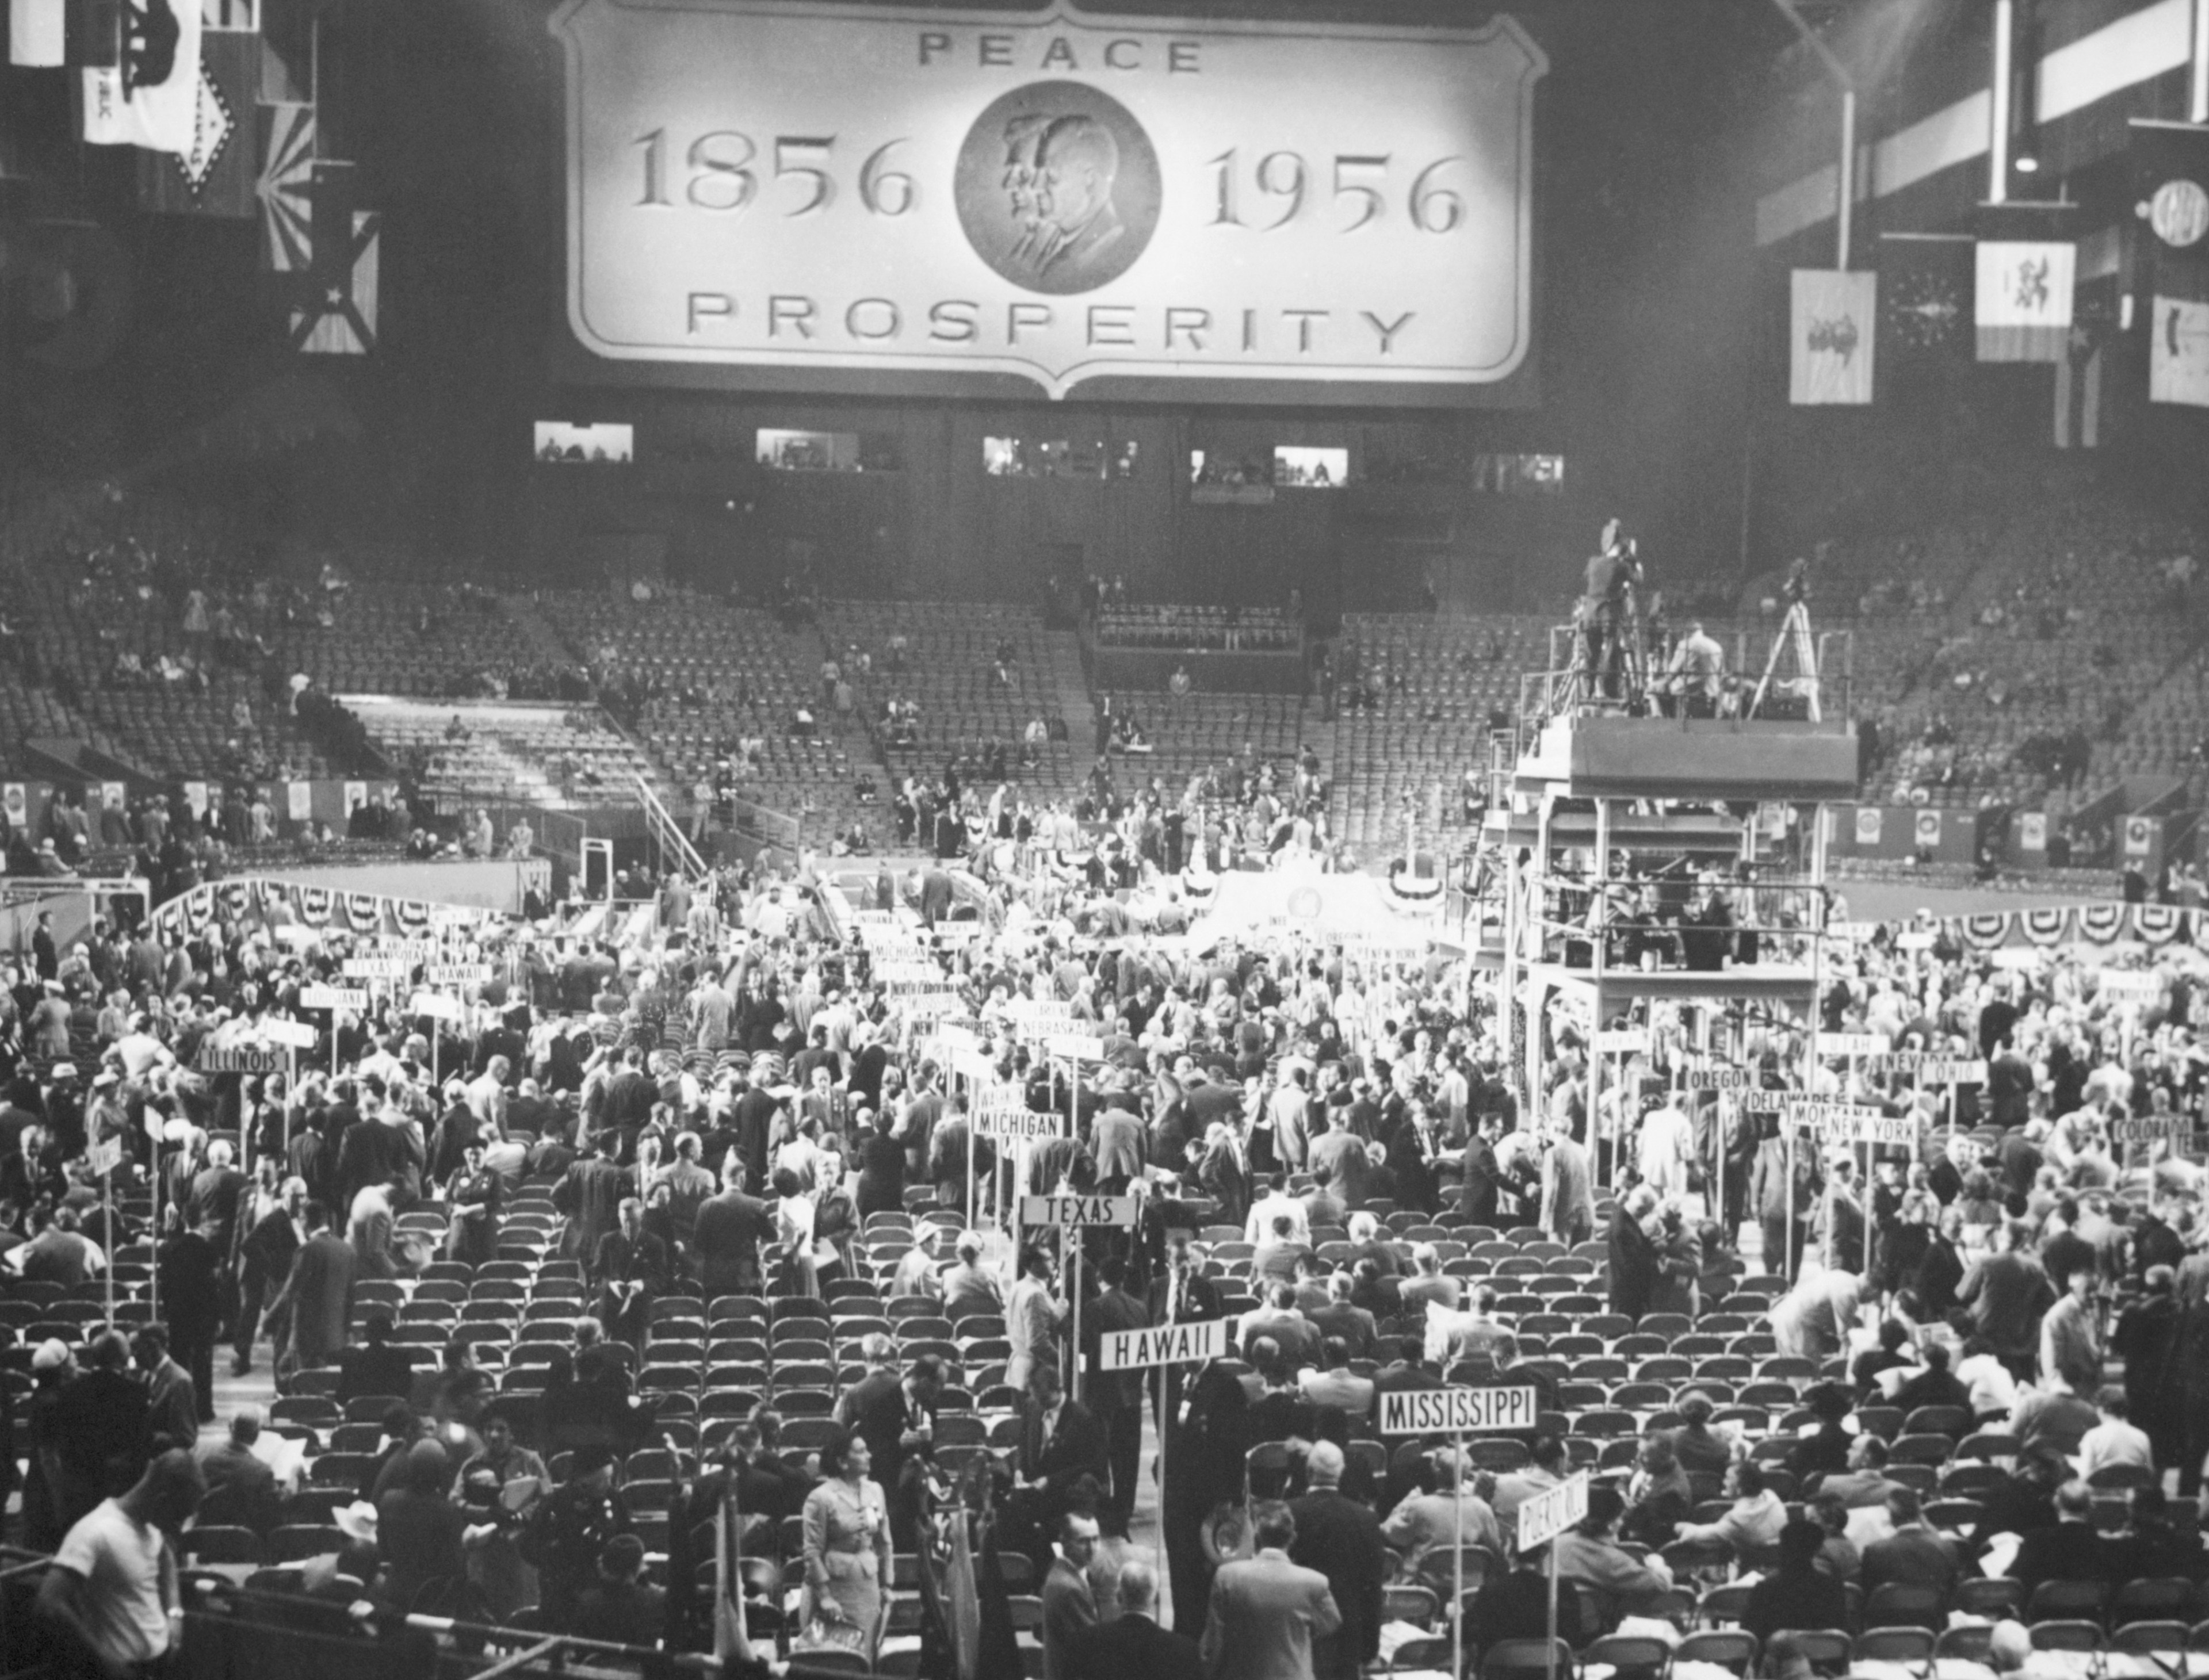 A large arena roughly half-filled has a large sign that reads &quot;PEACE 1859 1956 PROSPERITY&quot; during the Republican National Convention at the Cow Palace.